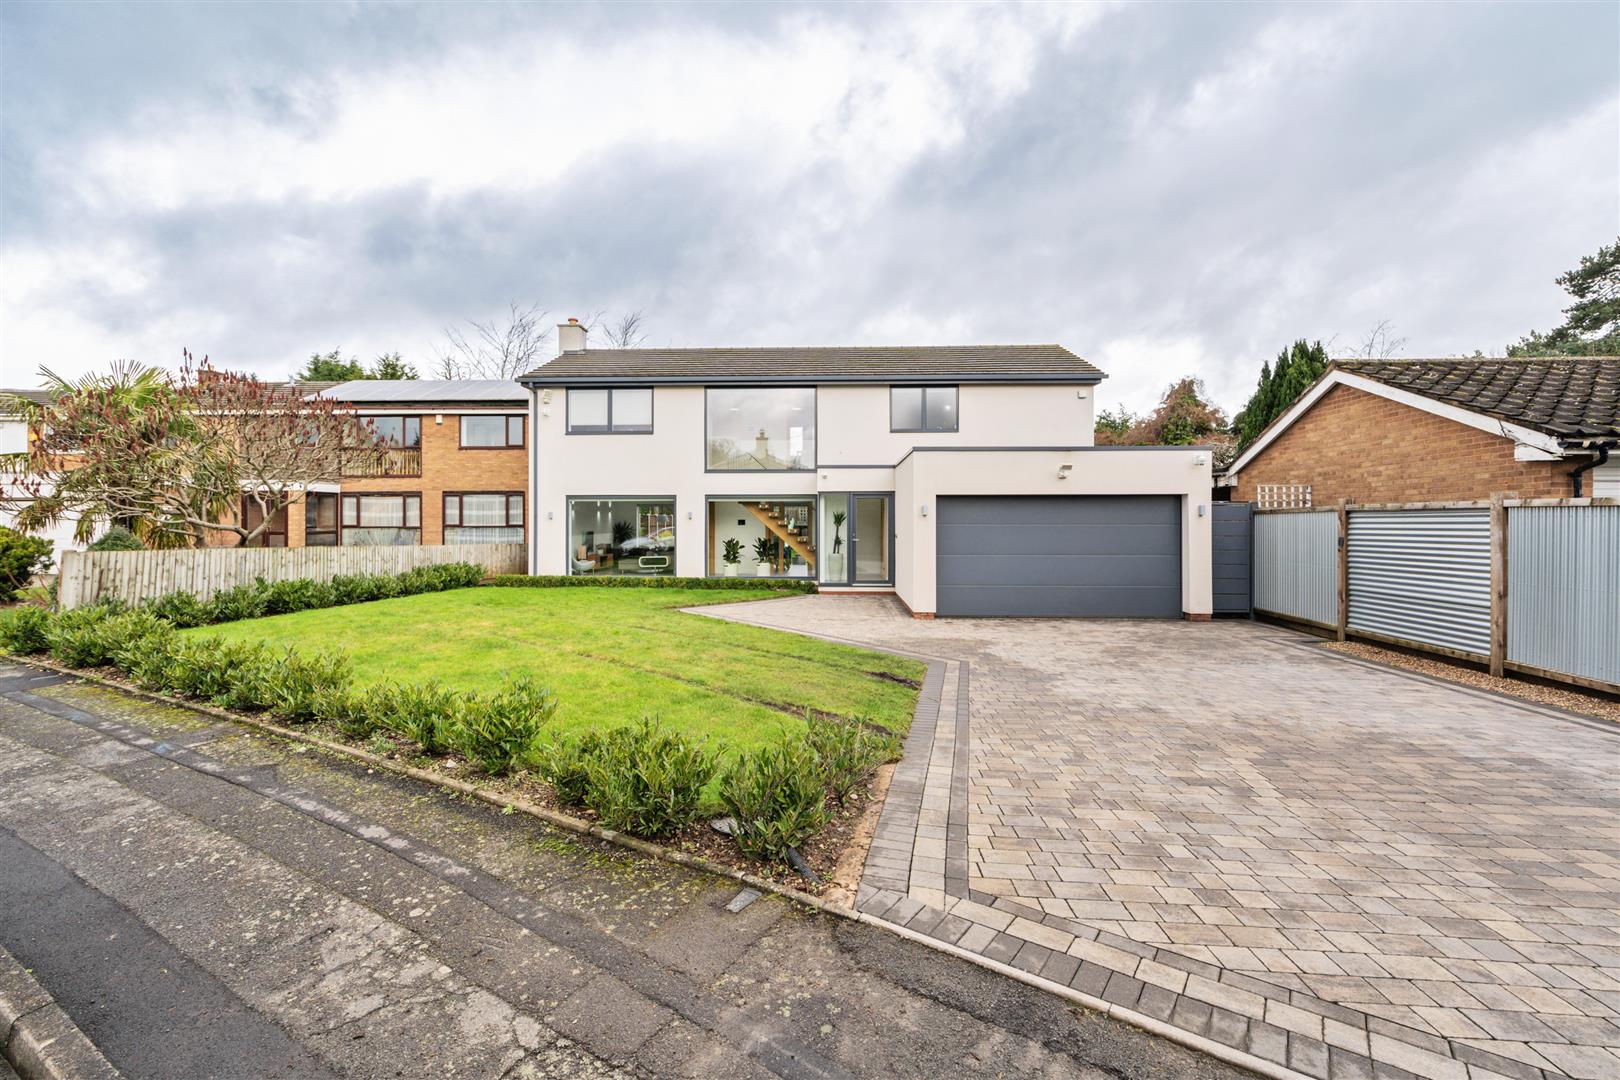 4 bed detached house for sale in Radford Rise, Solihull  - Property Image 1